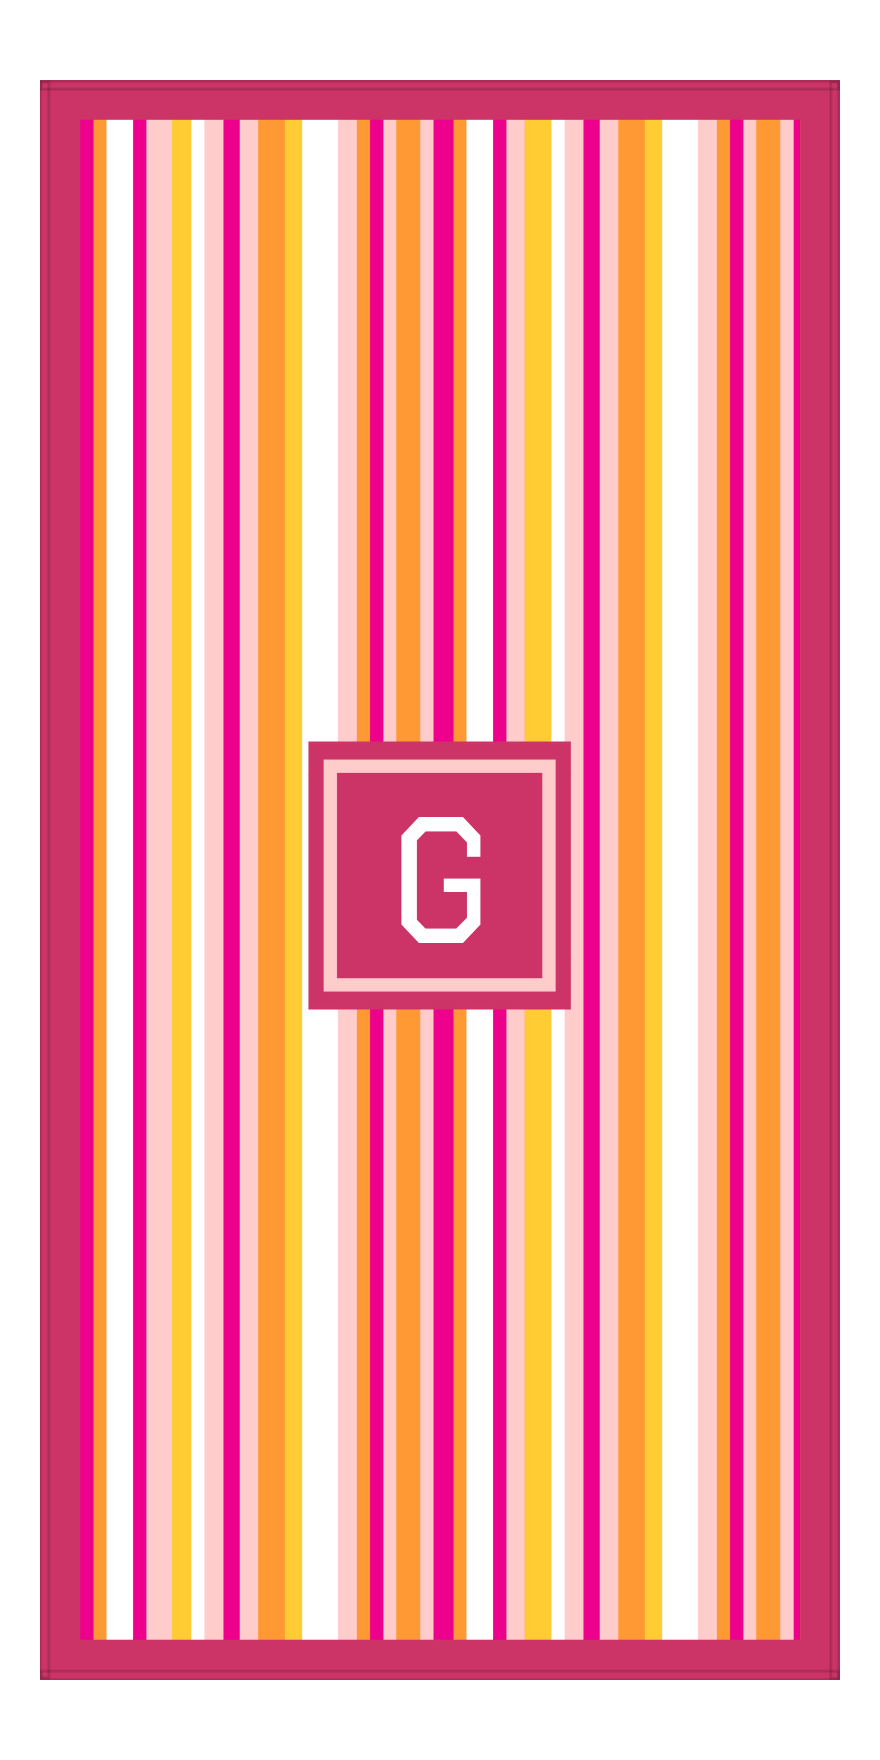 Personalized 5 Color Stripes 2 Repeat Beach Towel - Vertical - Pink and Orange - Square Frame - Front View